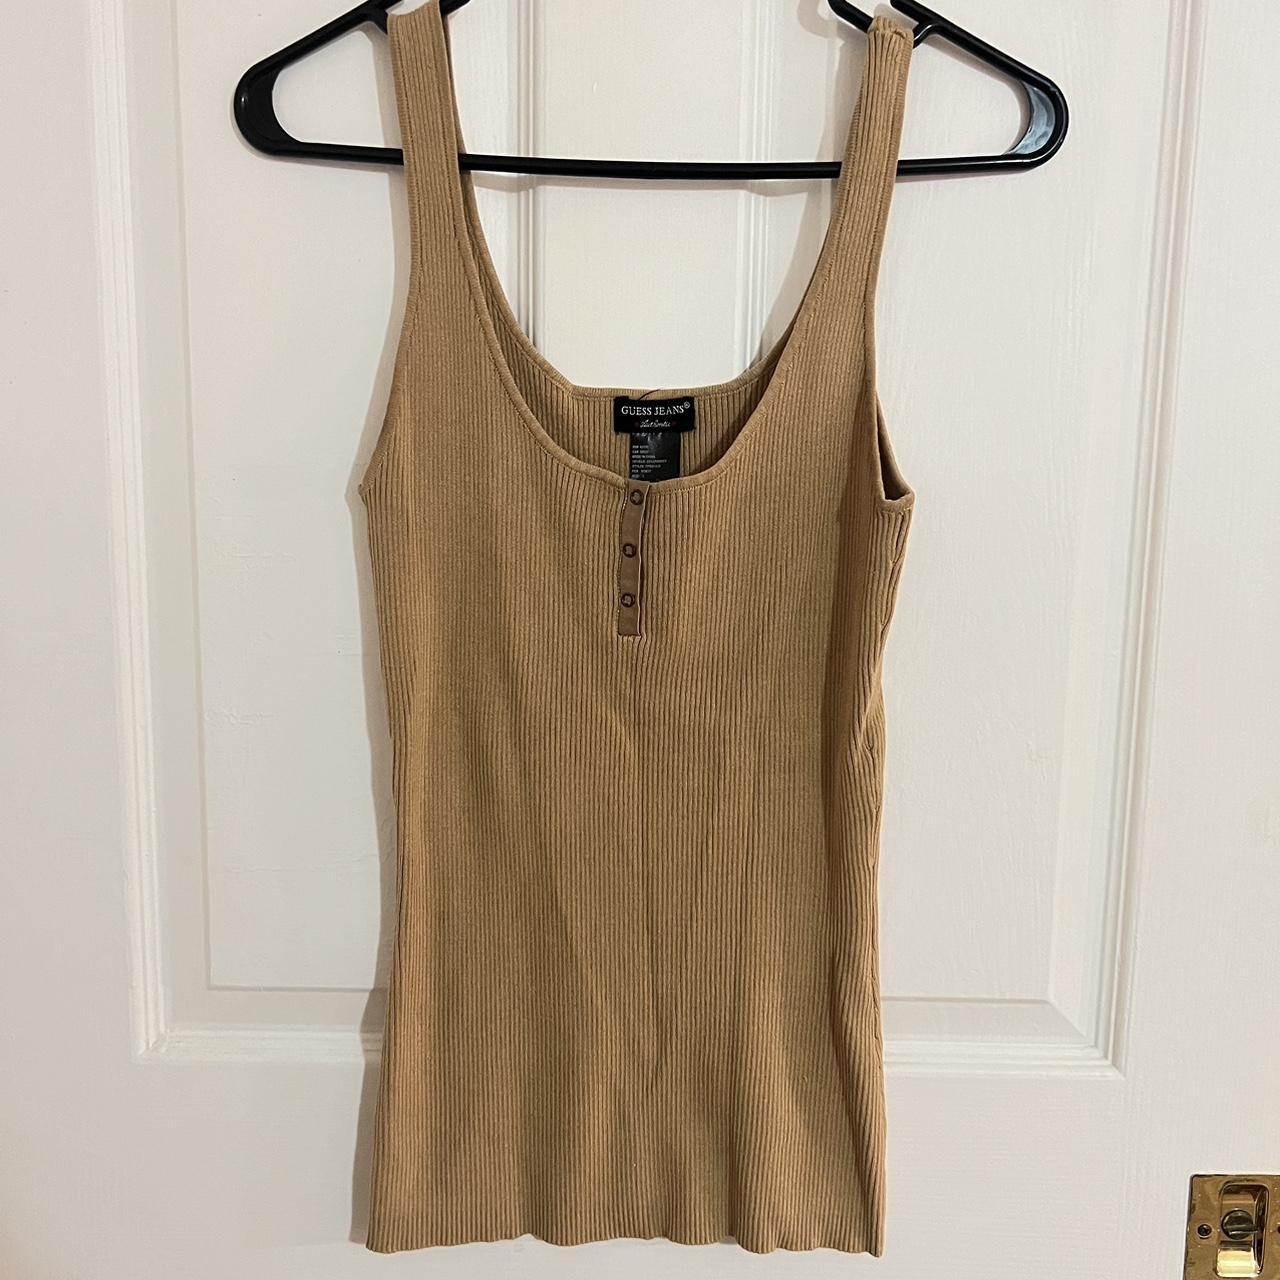 Guess Women's Tan and Cream Vest